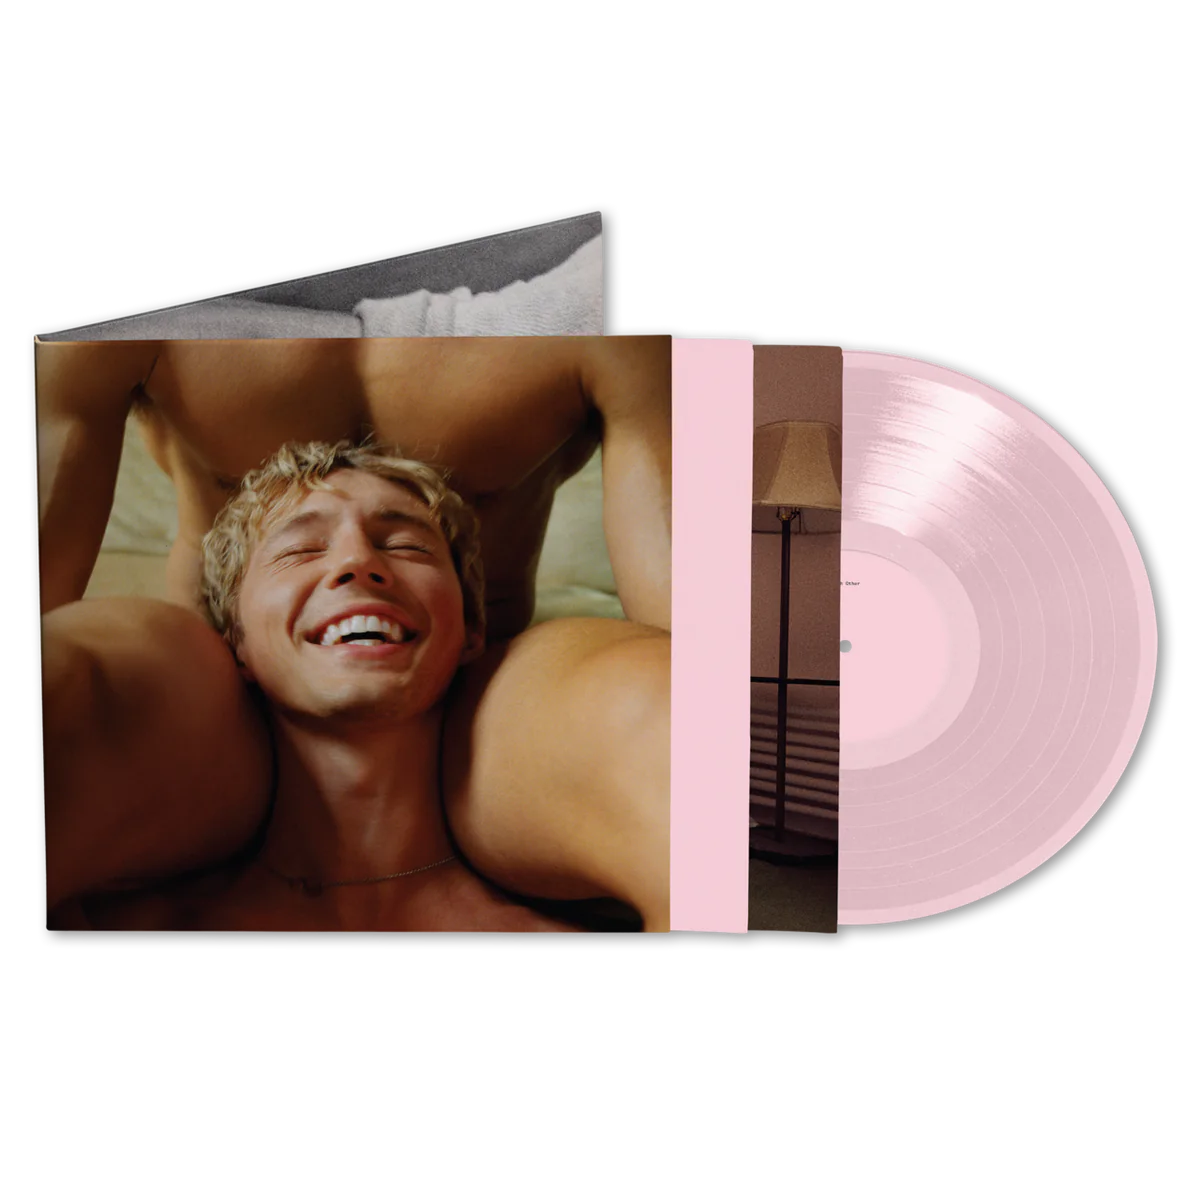 Vinyl - Troye Sivan : Something To Give Each Other (Baby Pink Vinyl) (Exclusive to The Record Hub.com) - The Record Hub